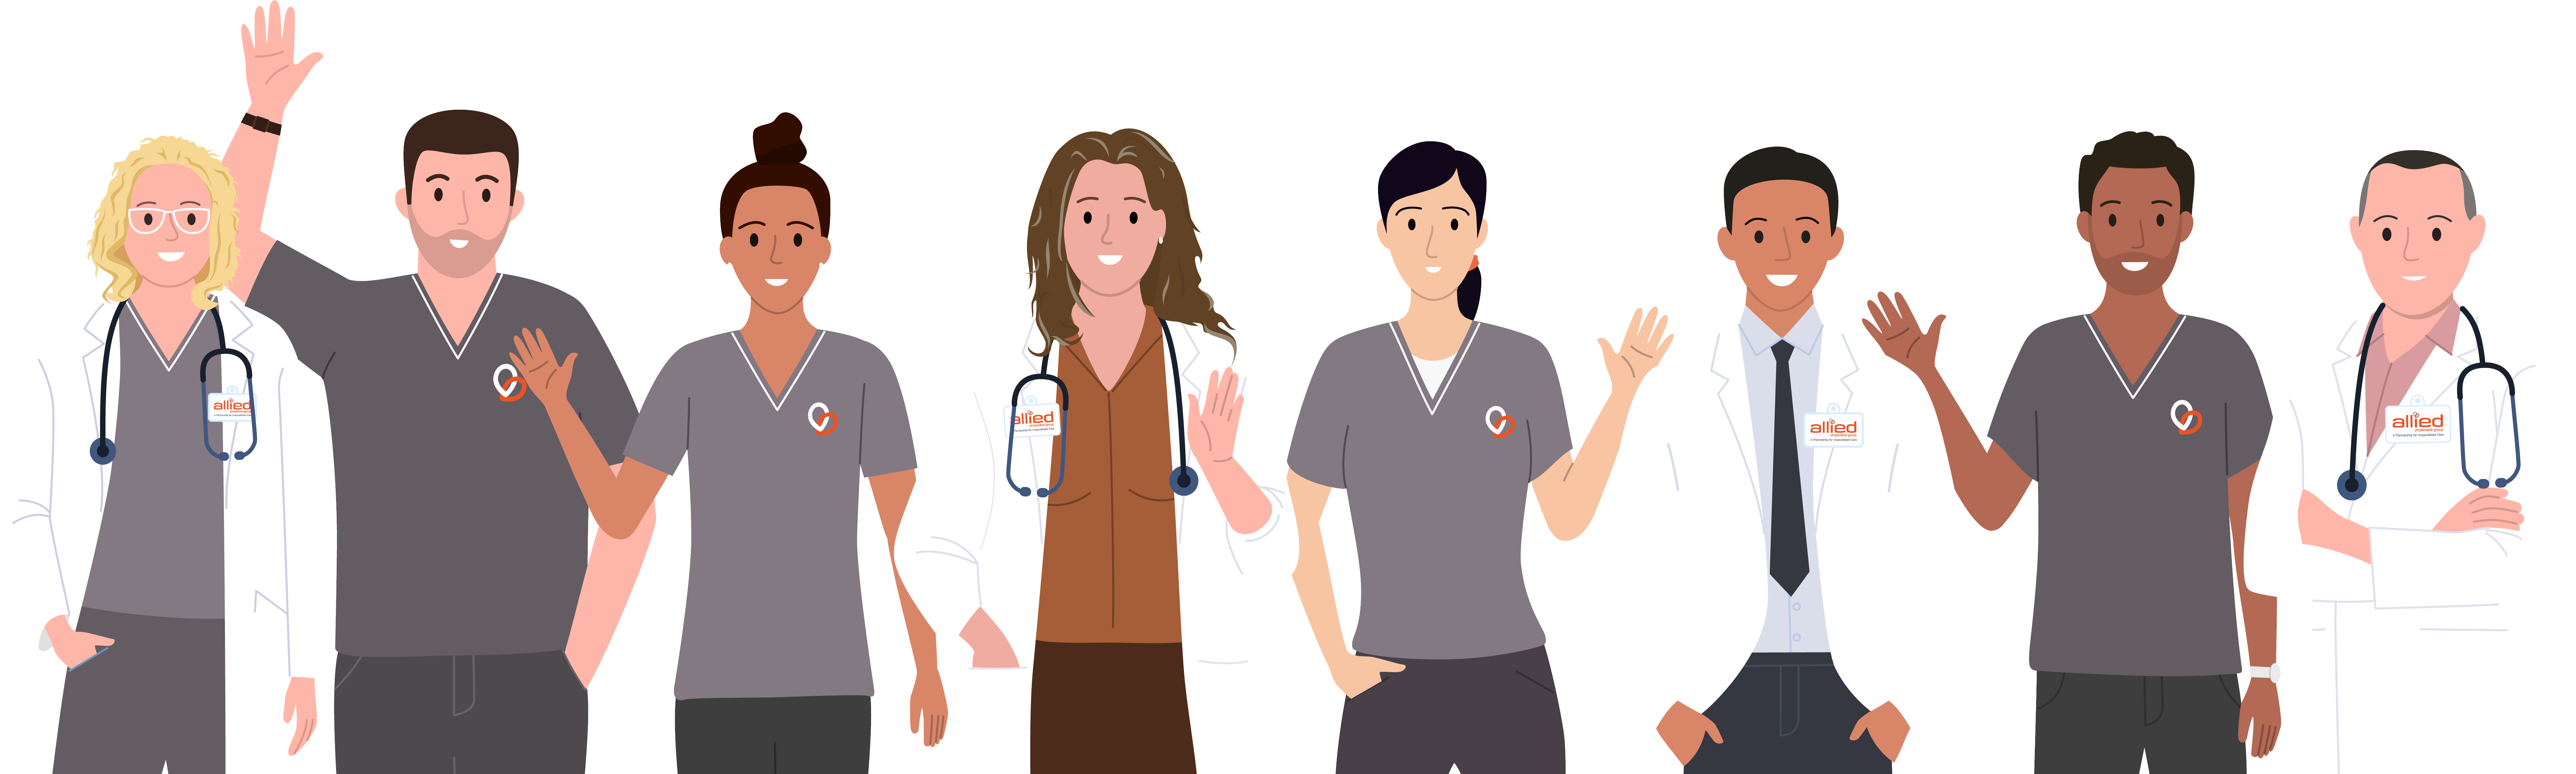 Group of doctors and nurses